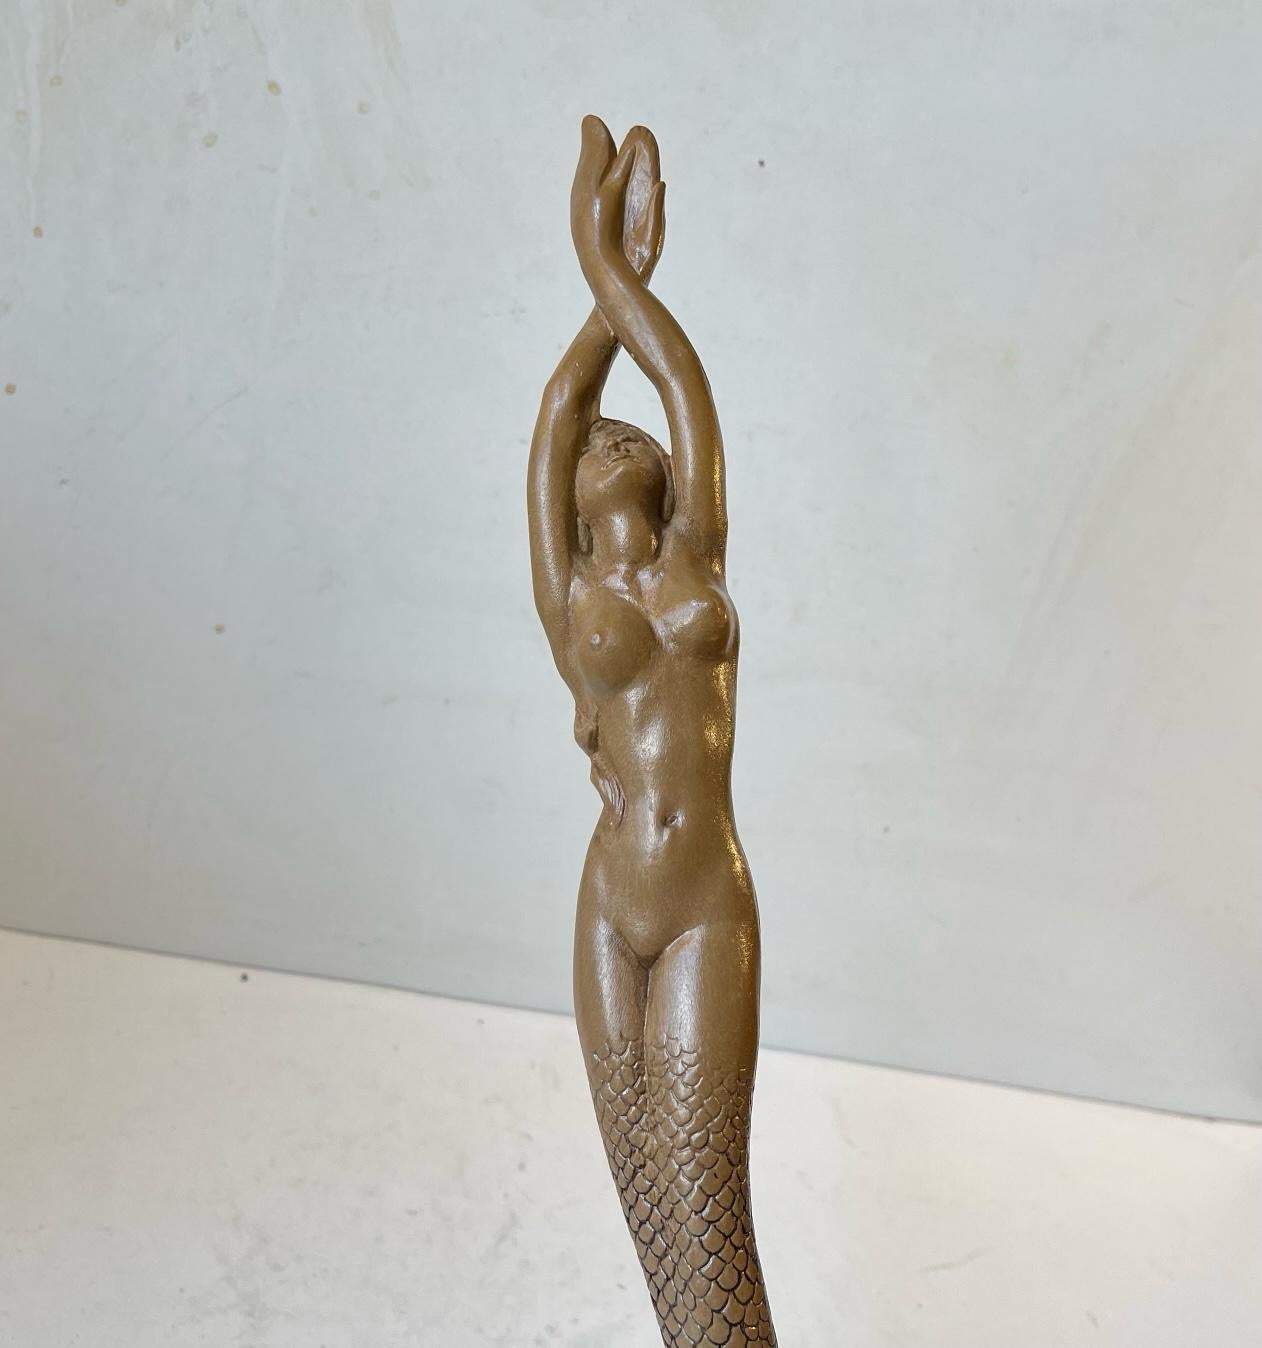 Elongated stylish mermaid shoe horn. It was cast and made in France during the 1940s or 50s. Its made from Galalith which is a type of bakelite usually used for jewelry and buttons. Imprinted to its back: Made in France. Measurements: H: 50 cm, W: